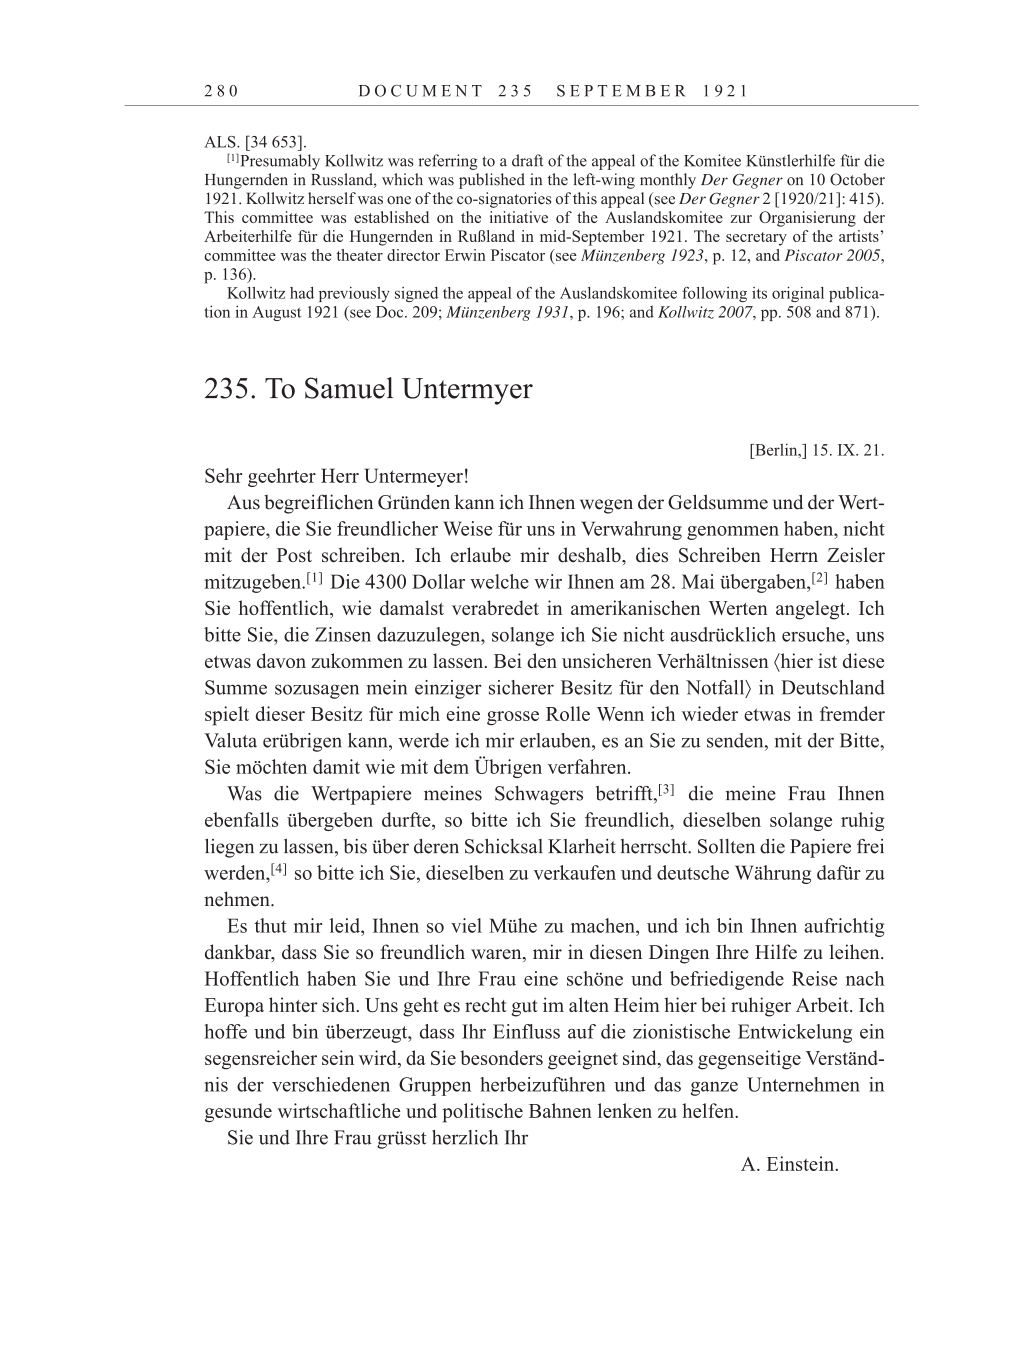 Volume 12: The Berlin Years: Correspondence January-December 1921 page 280